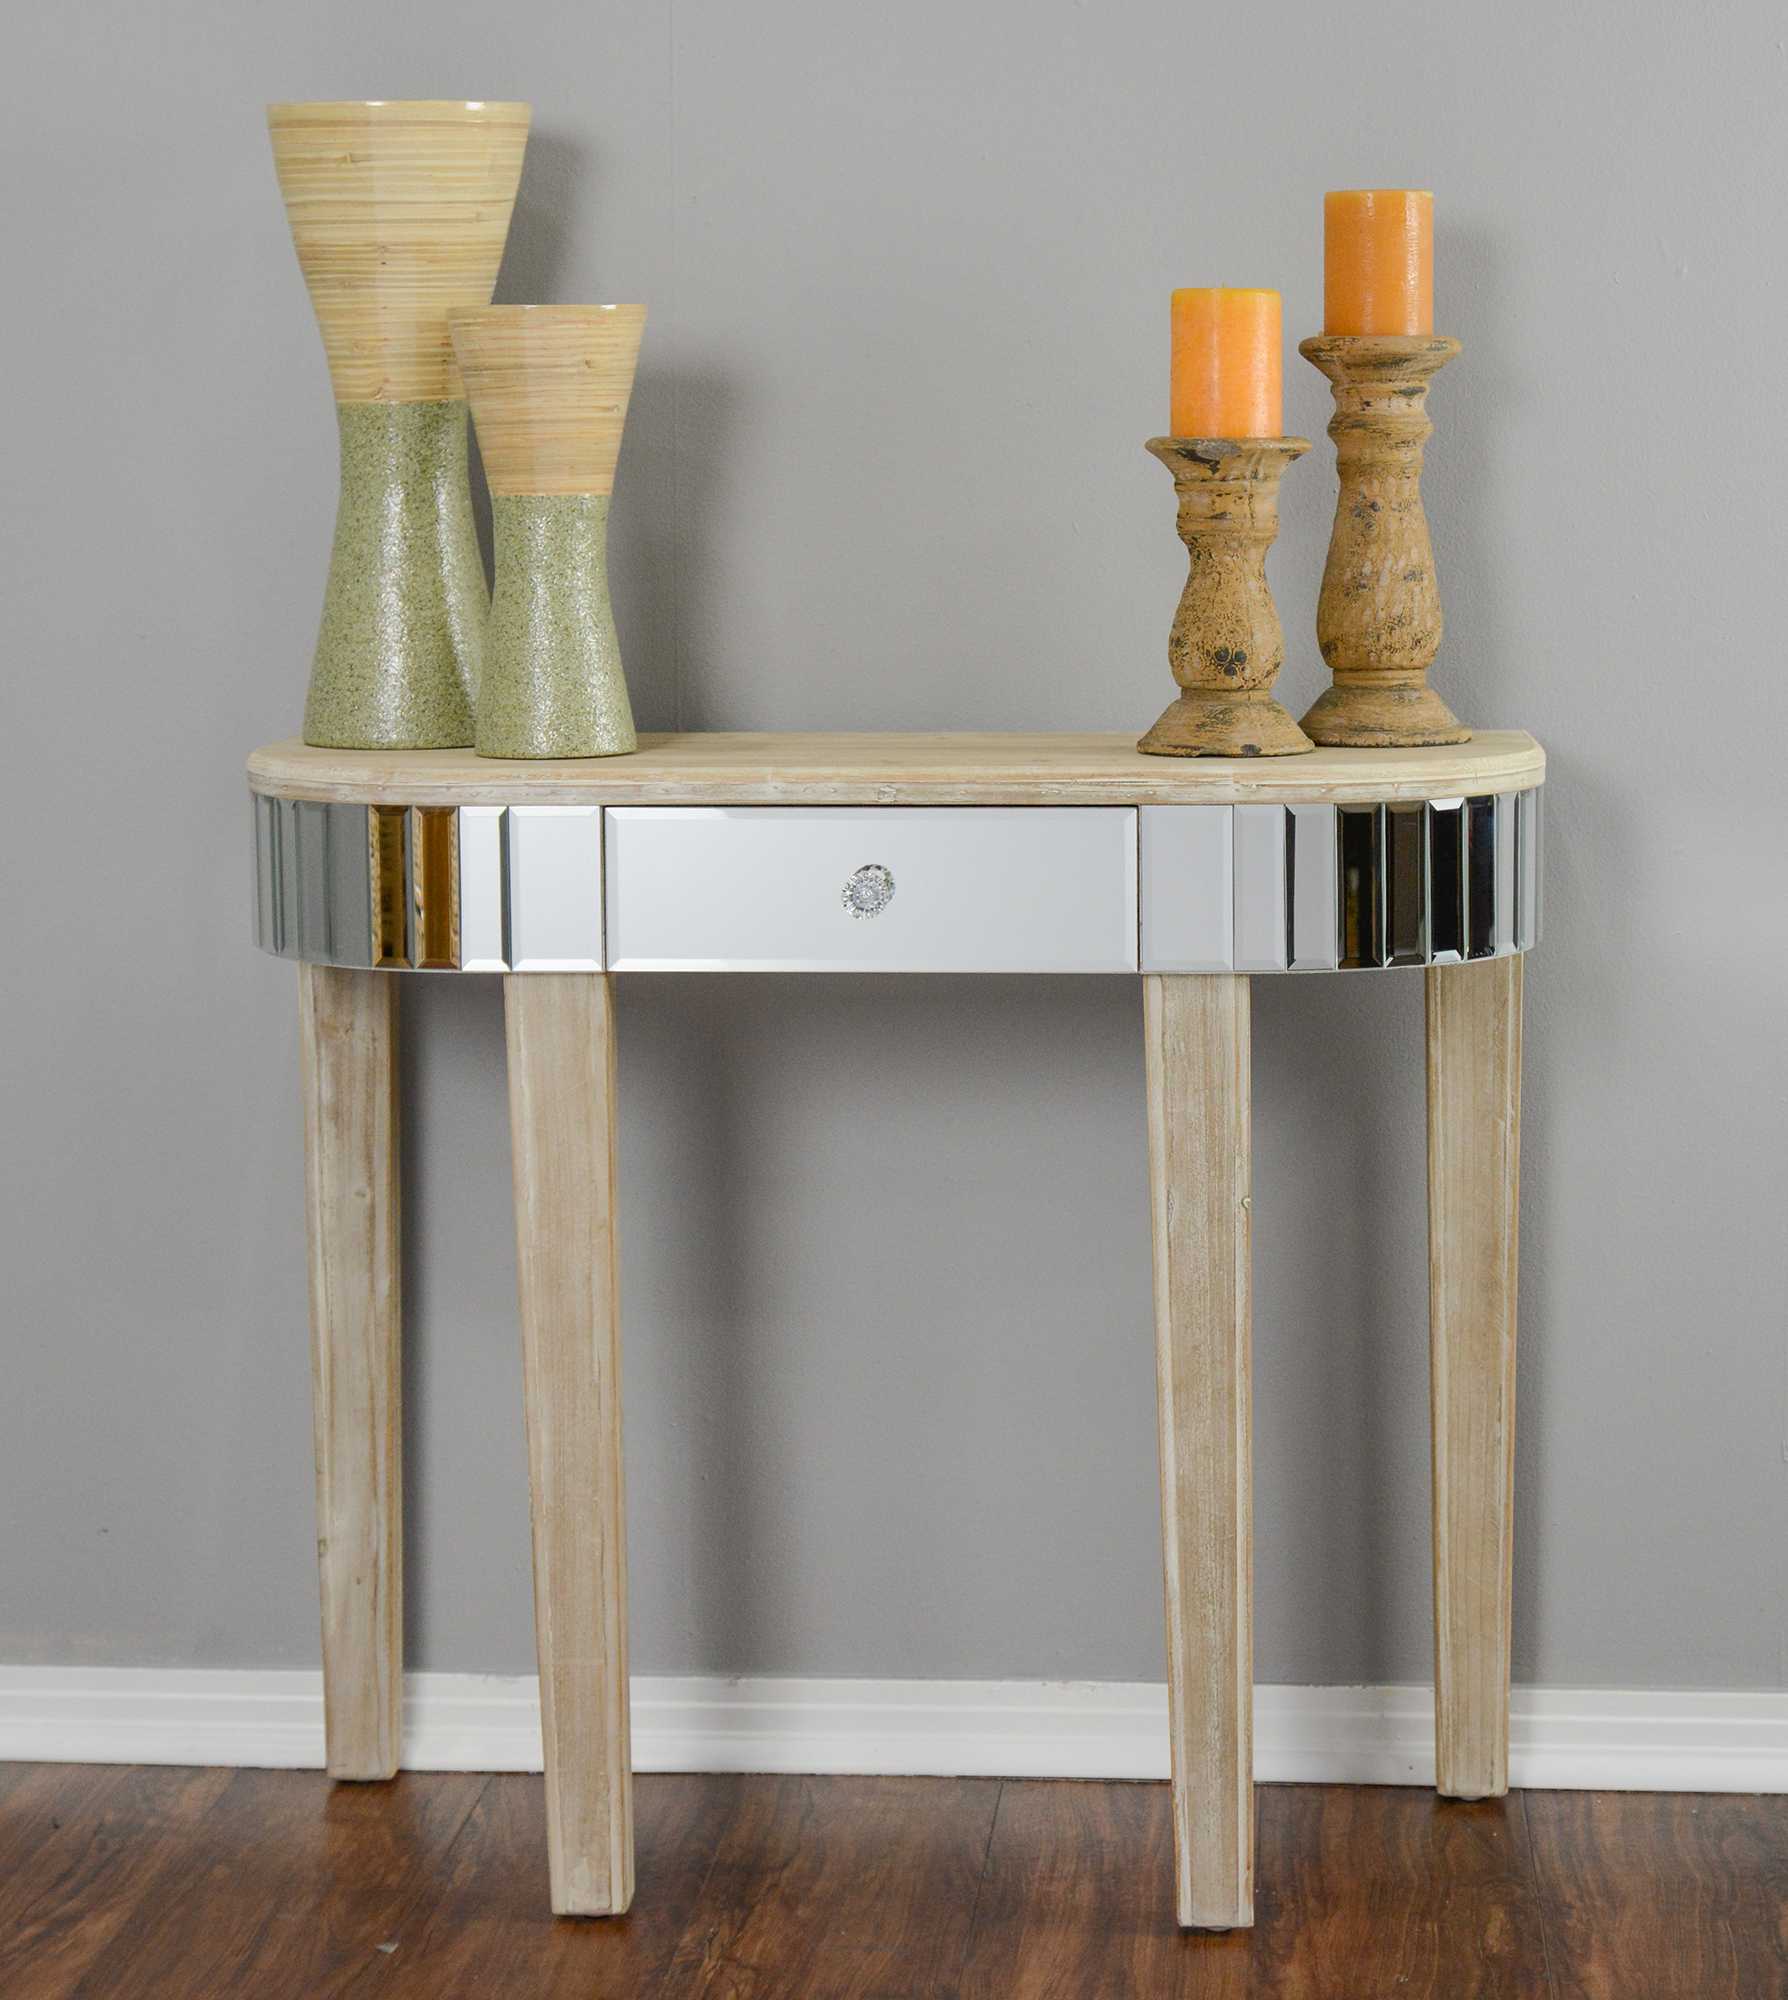 35.5" X 13" X 31" White Washed MDF Wood Mirrored Glass Console Table with a Mirrored Glass Top and a Drawer